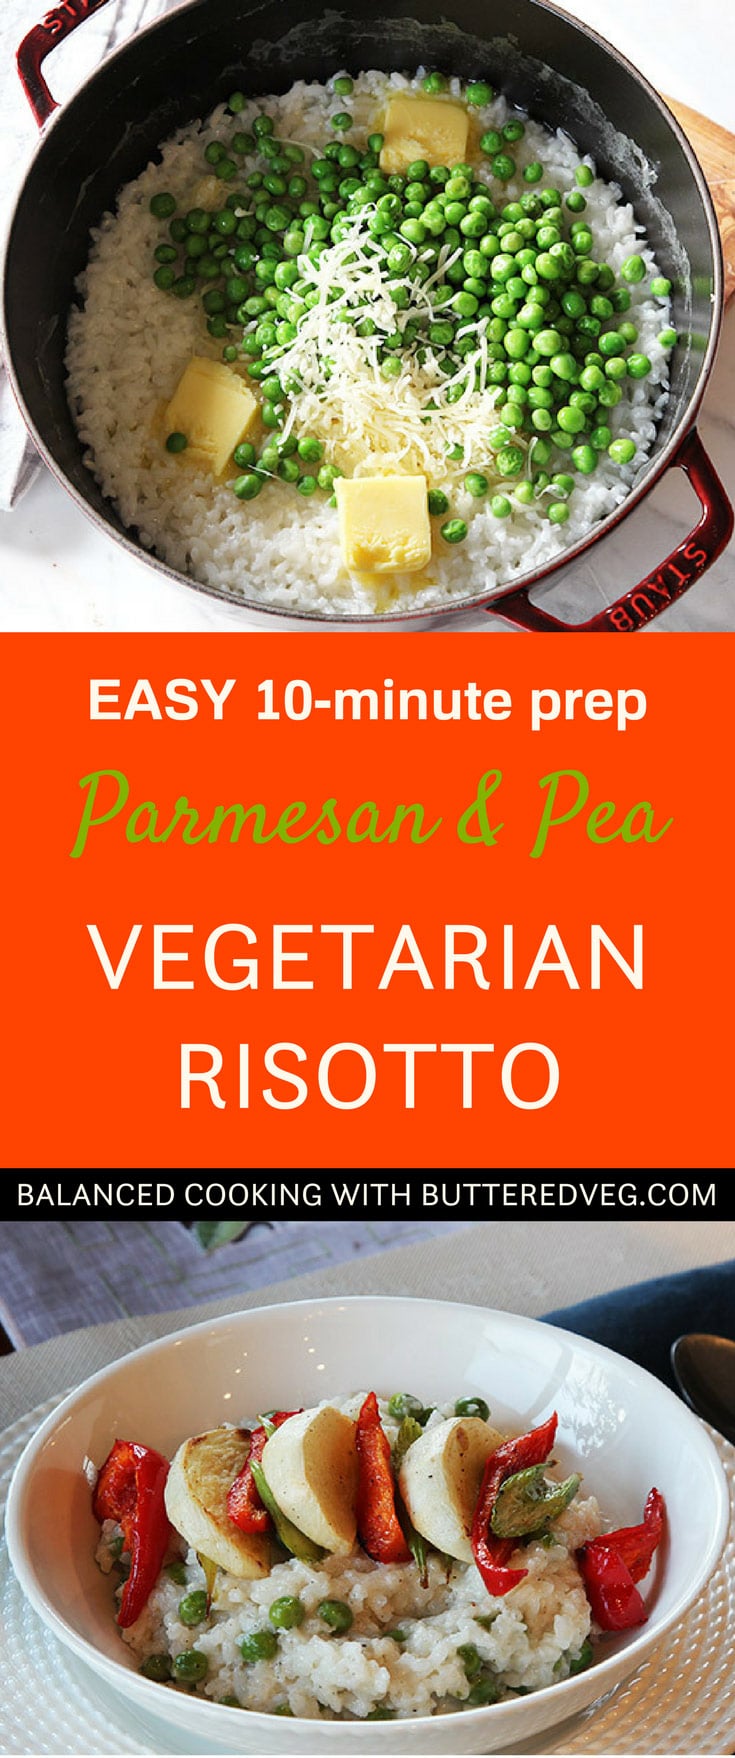 Easy Vegetarian Risotto With Parmesan And Peas